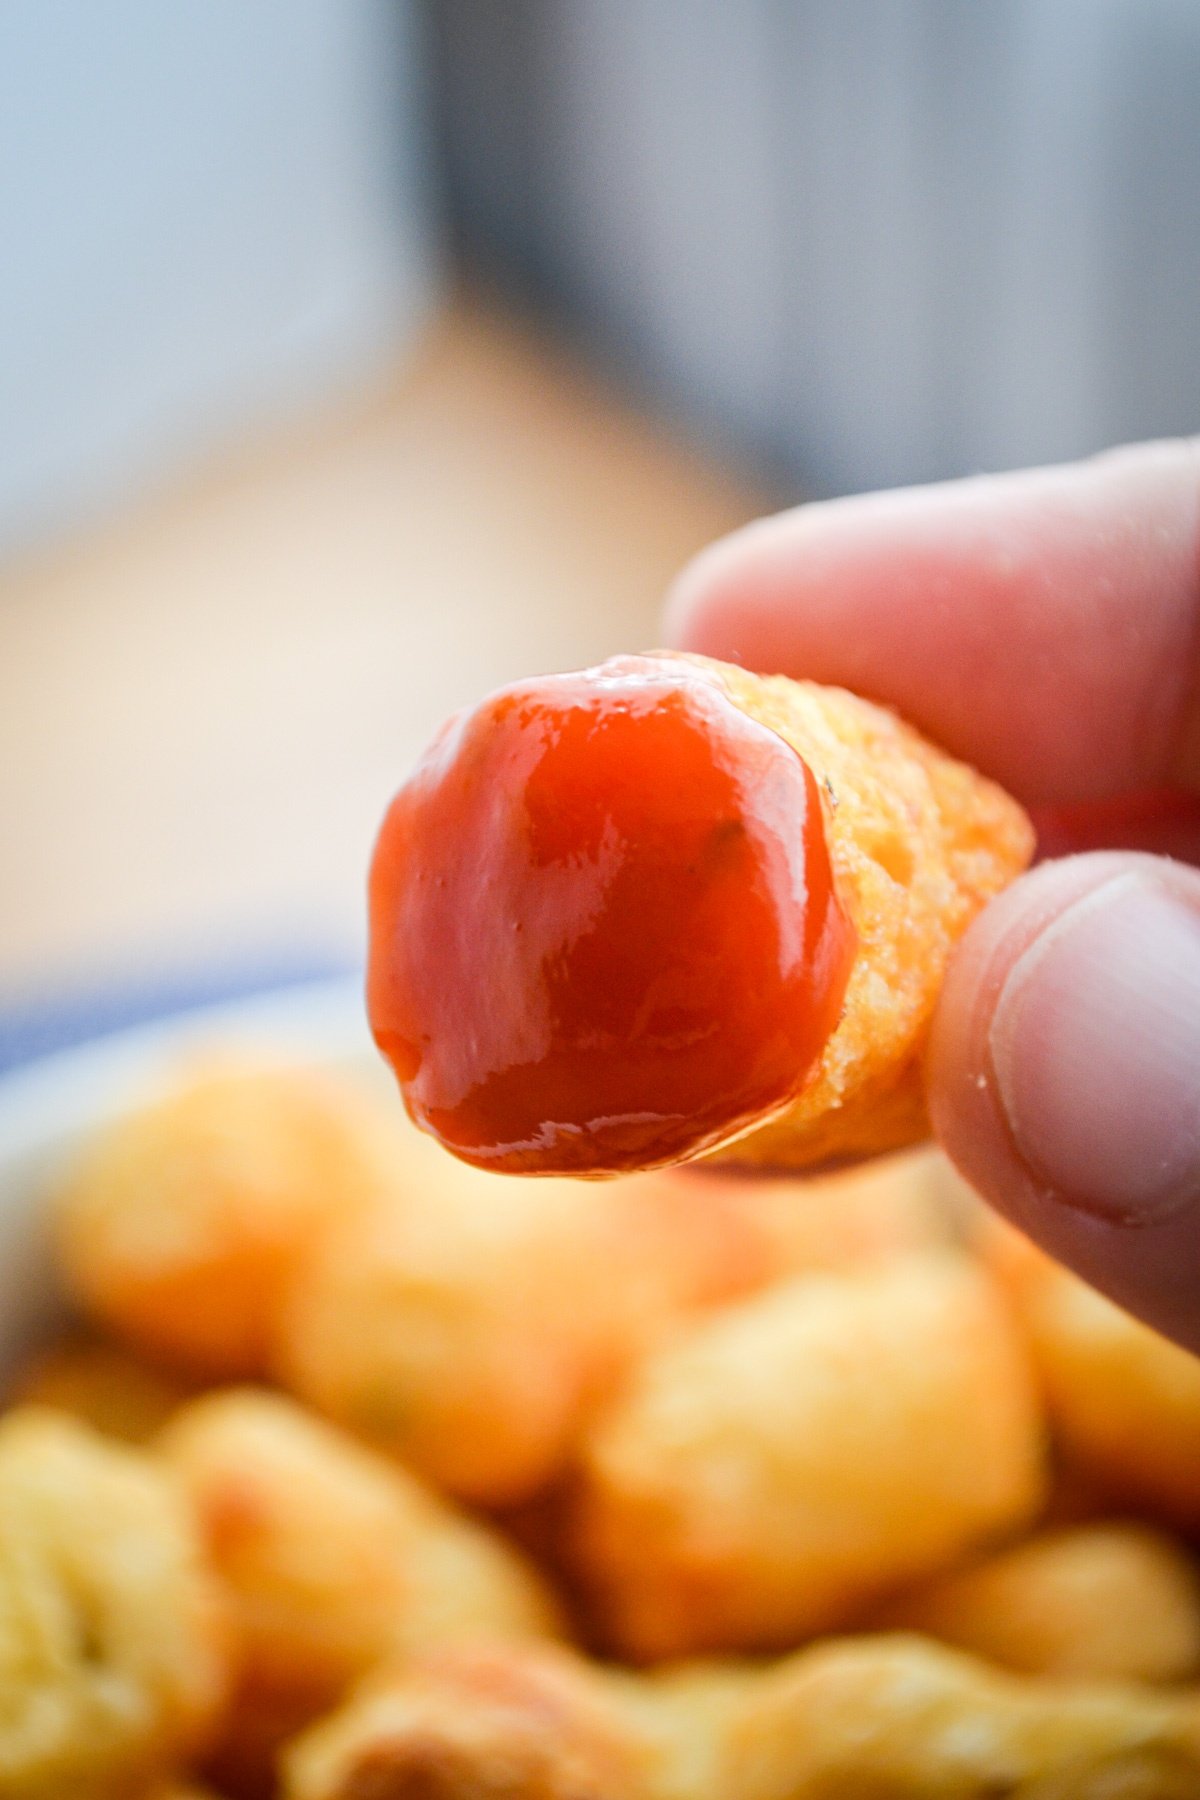 A tater tot being dipped in ketchup.